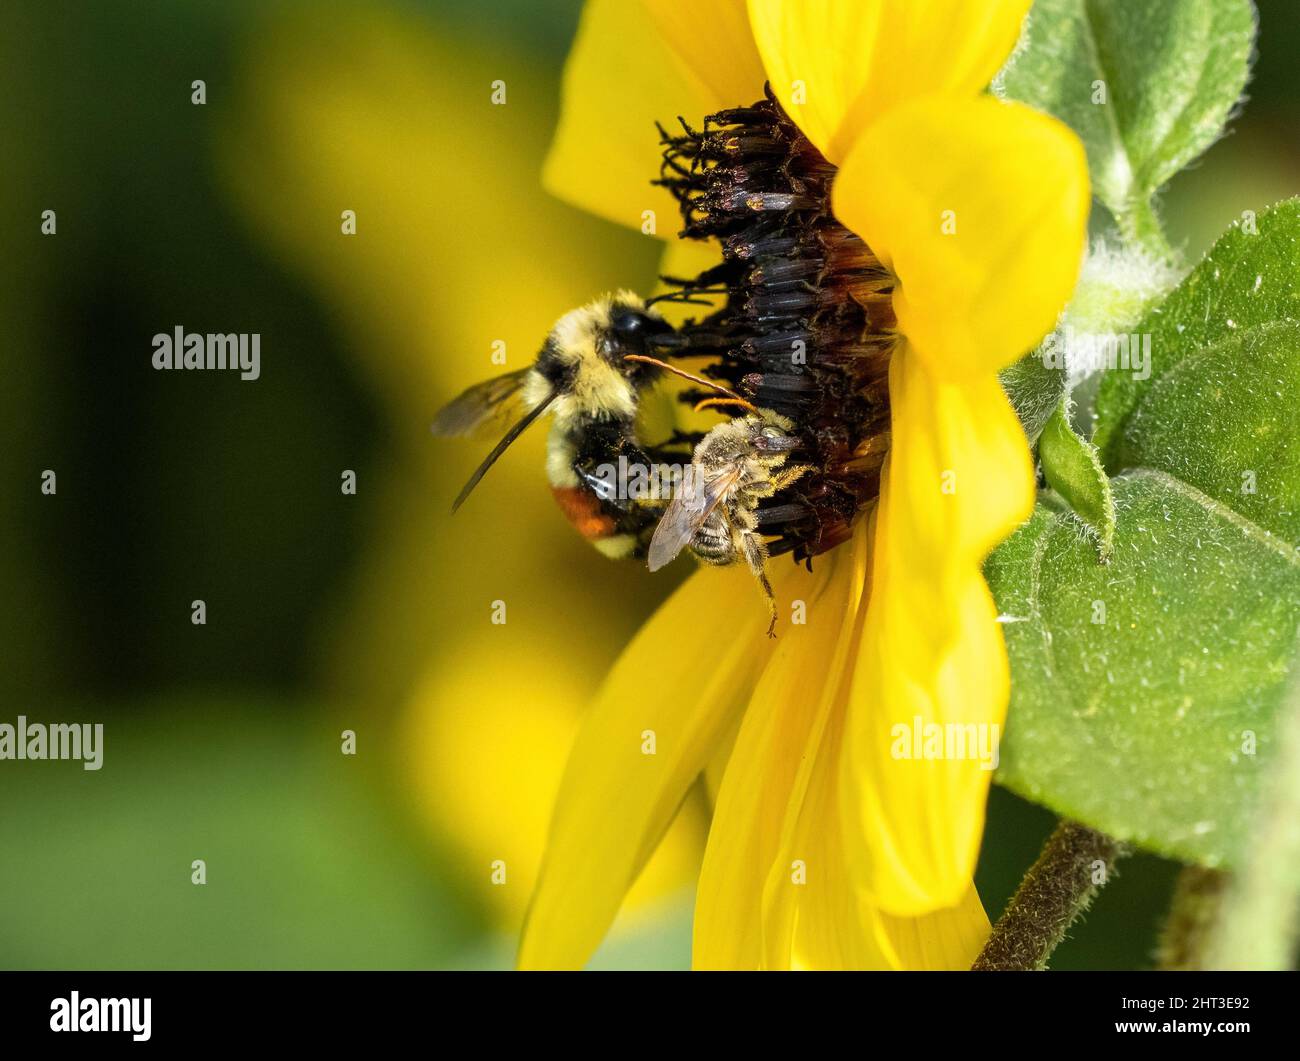 Two different types of bees pollinating on the same Sunflower. A male Long-horned bee in the forefront, and an Orange-belted Bumblebee in the back. Stock Photo